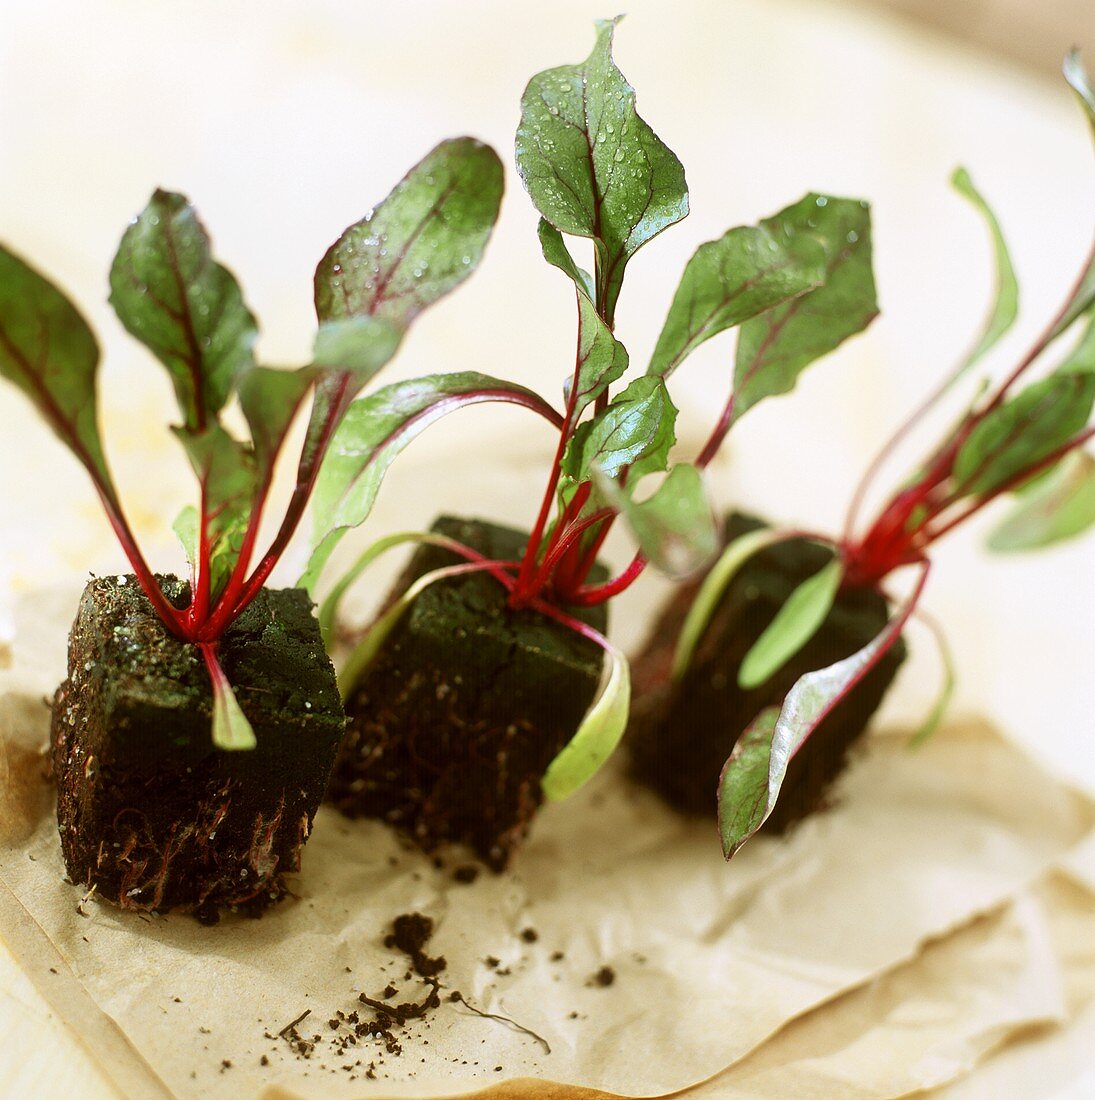 Small beetroot plants